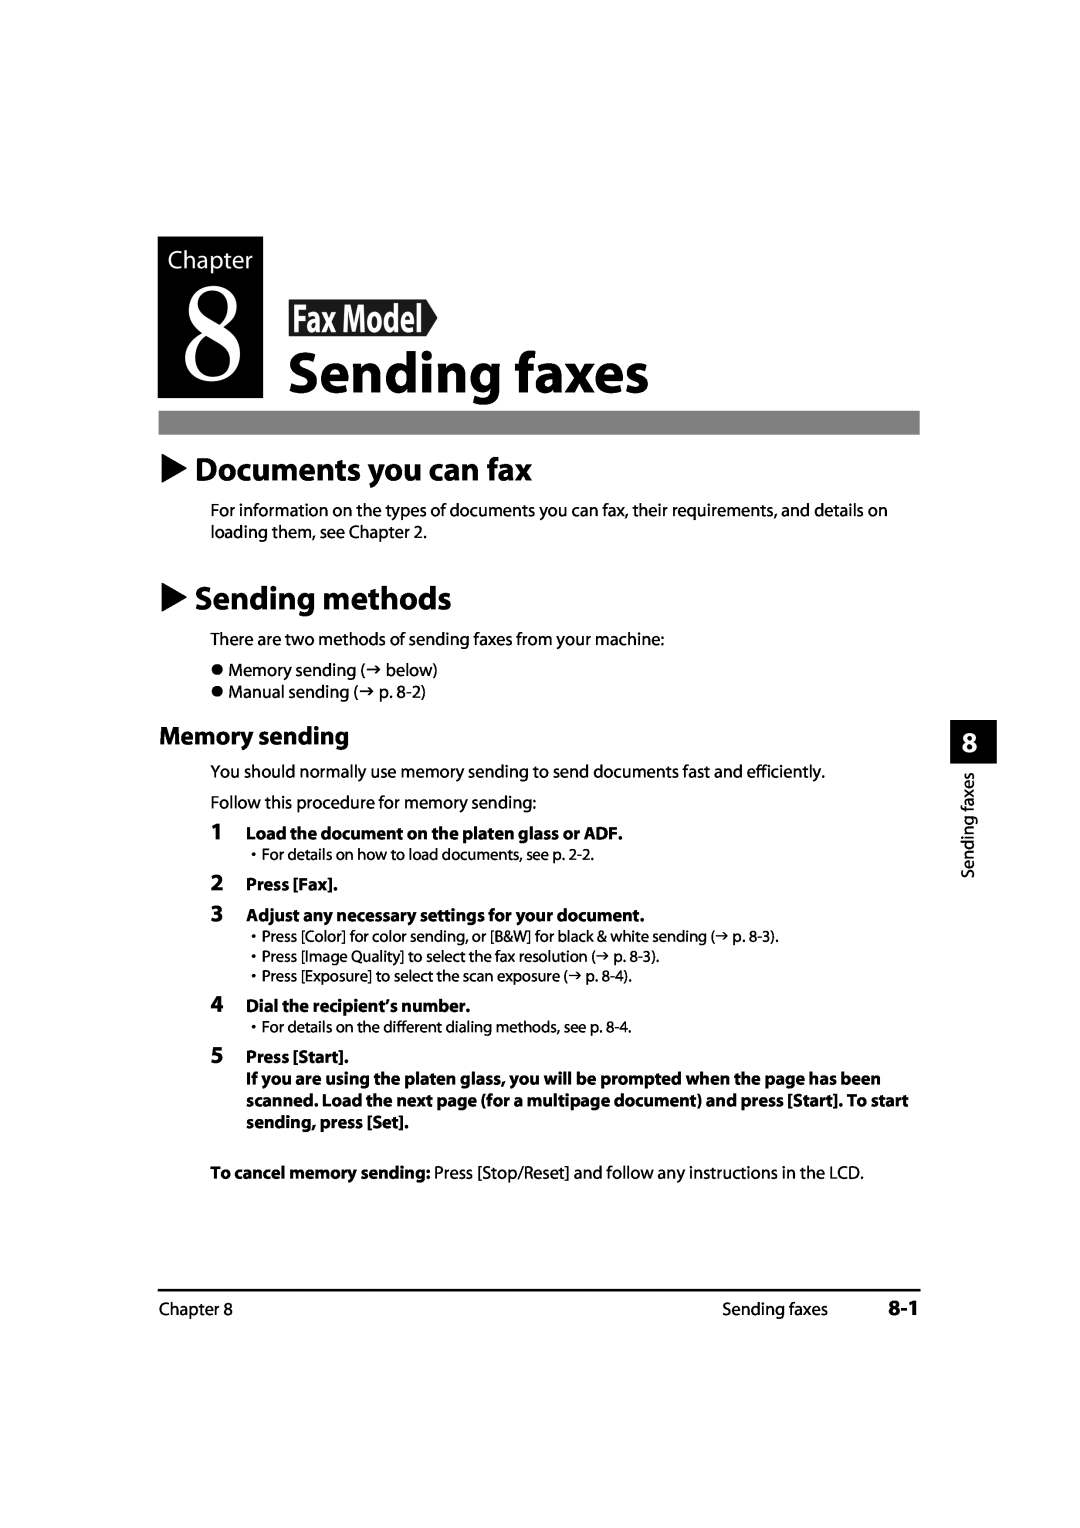 Canon 730i Sending faxes, Documents you can fax, Sending methods, Memory sending, Chapter, Dial the recipient’s number 